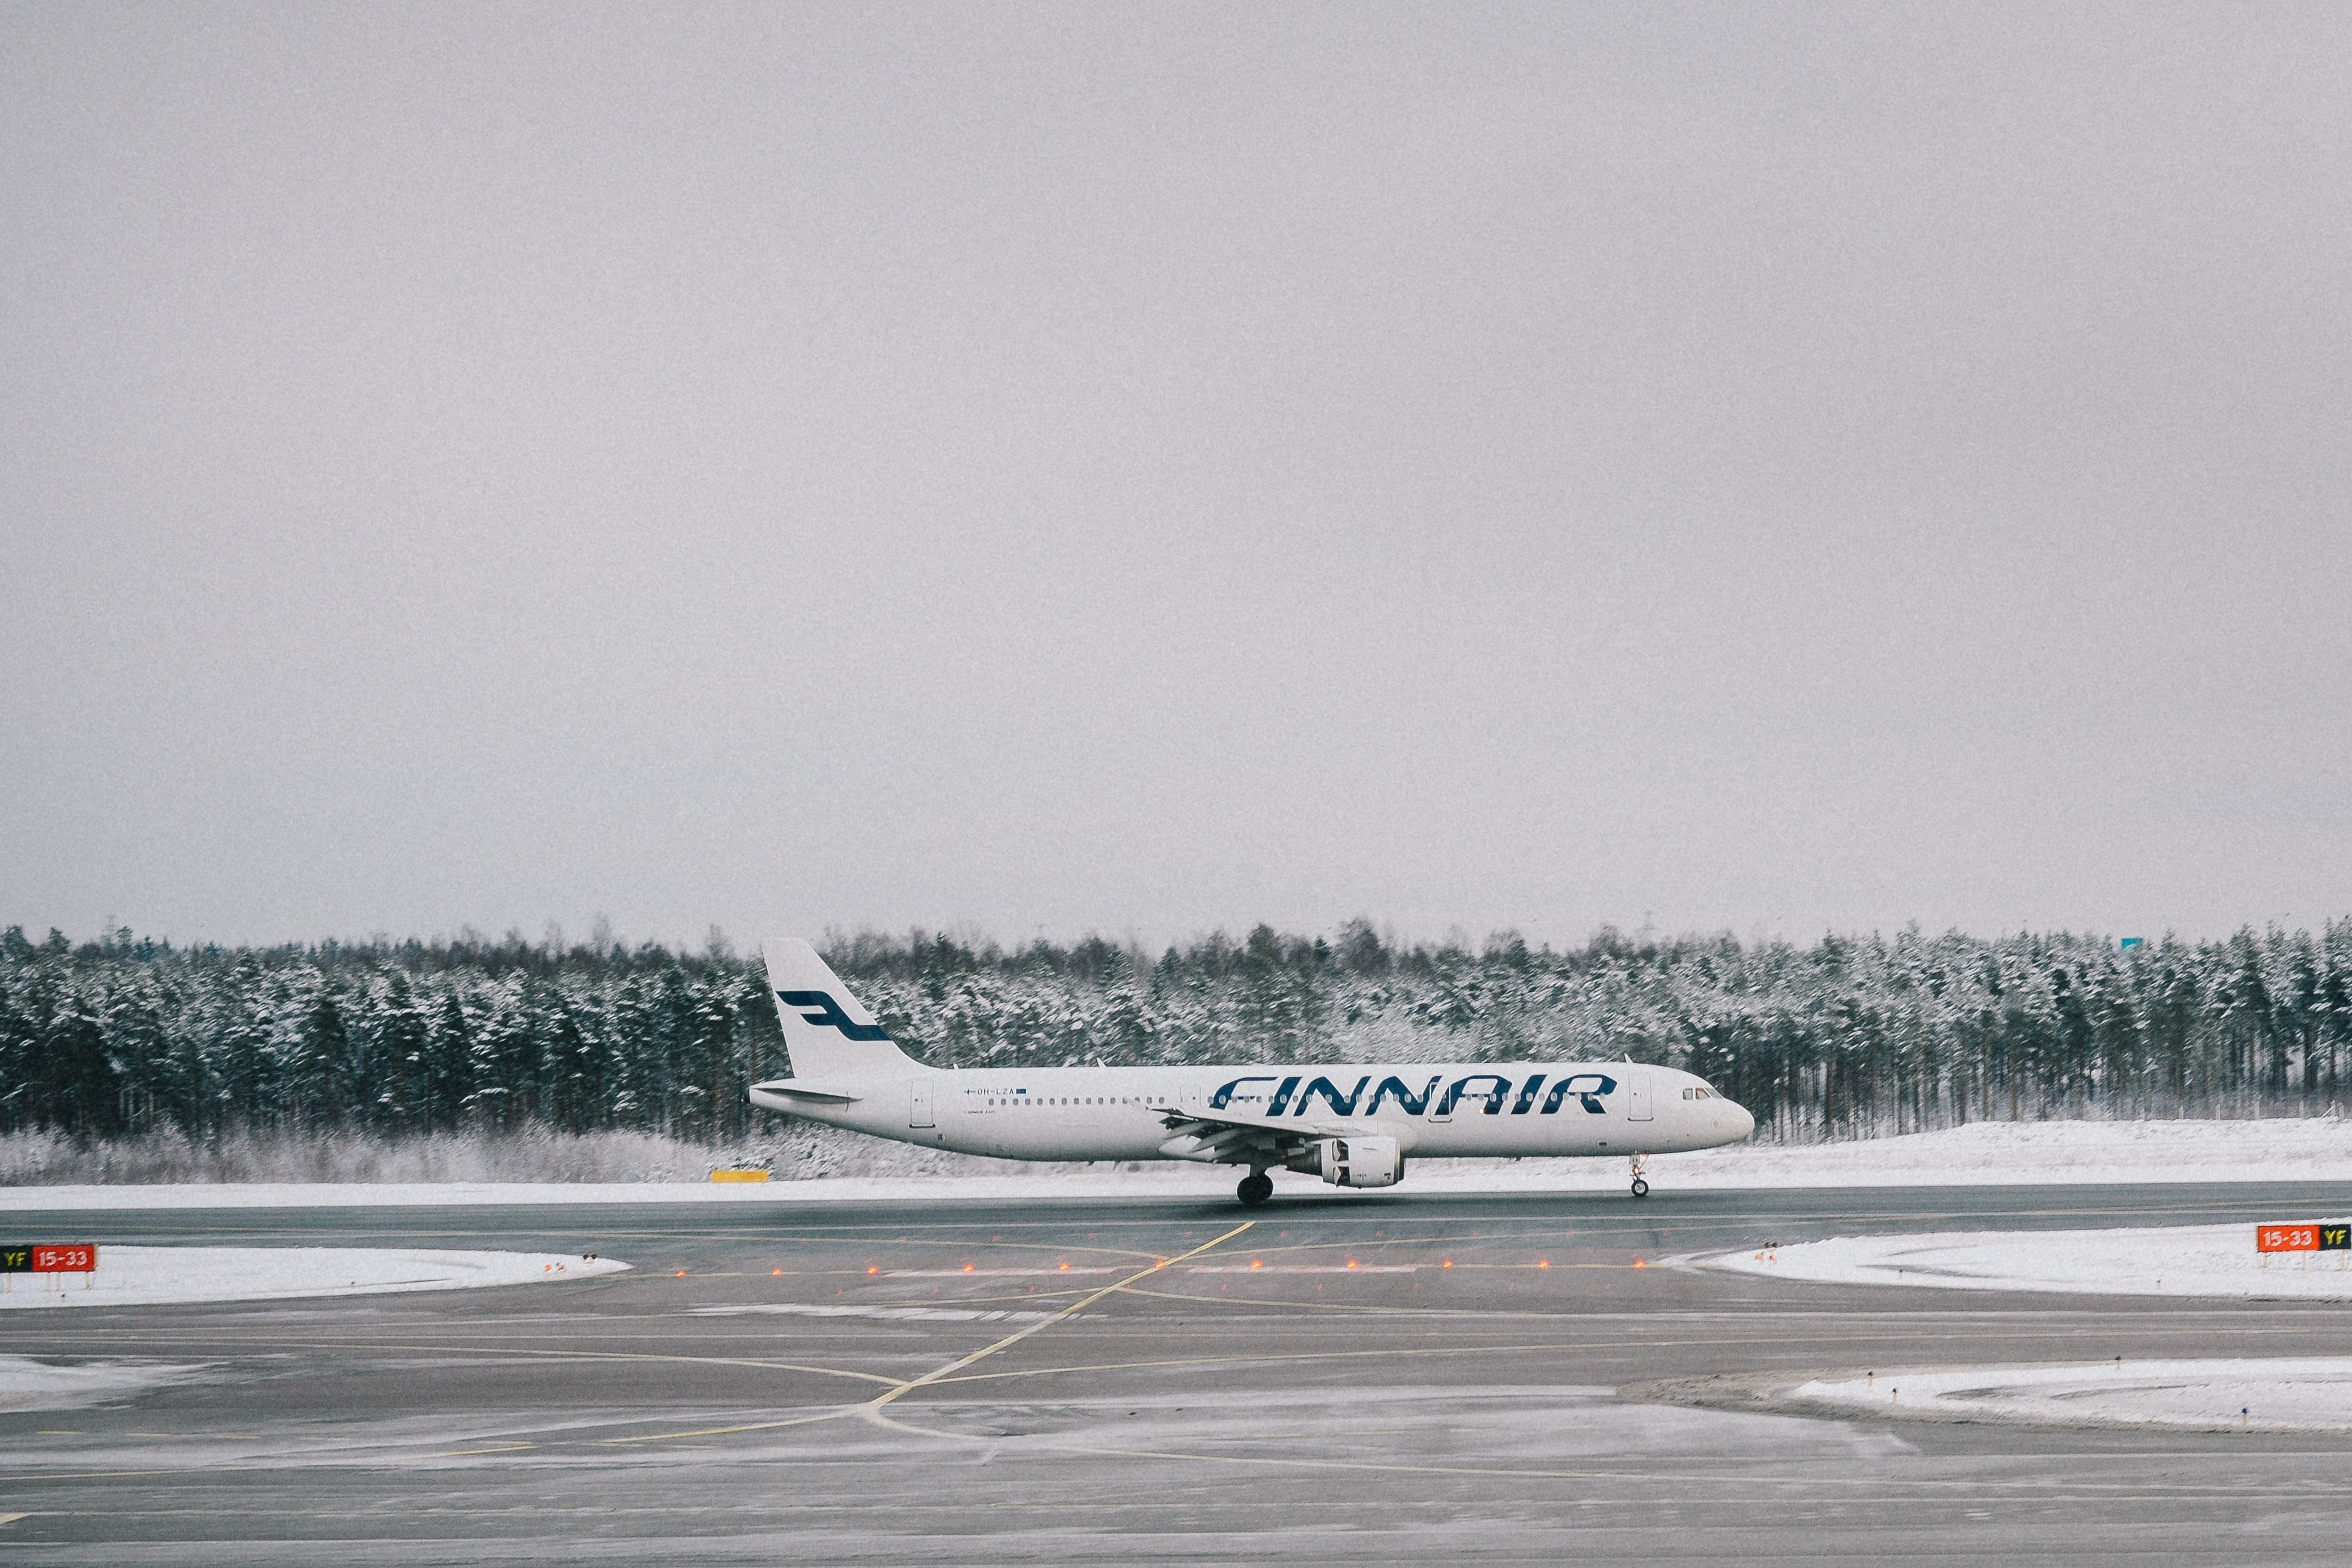 Photo of a FinnAir plane at the airport